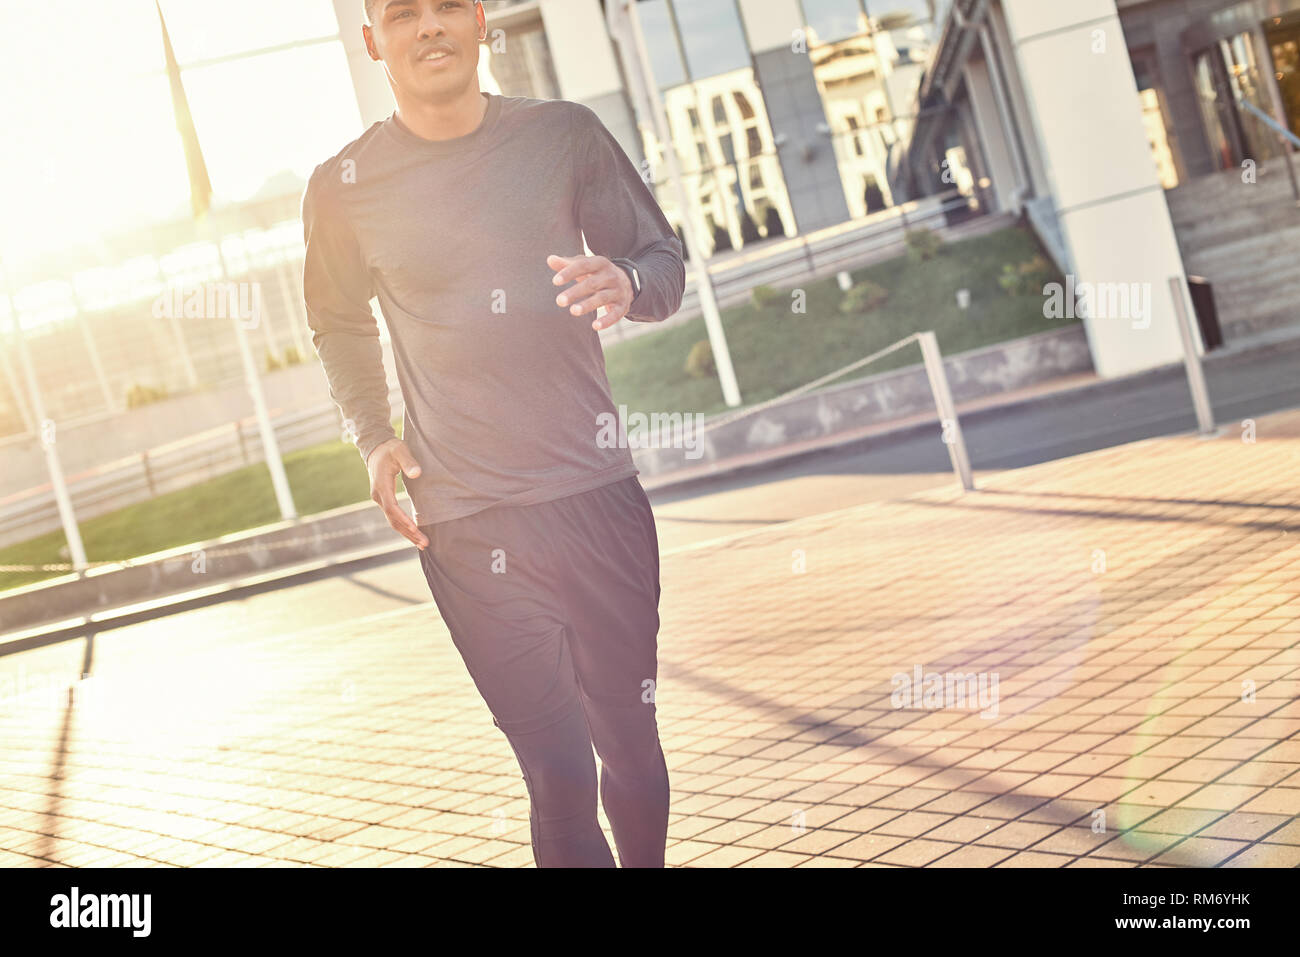 Perfect sunny morning. Young smiling african man in sportswear enjoying sunny morning while doing cardio training outside. Healthy lifestyle. Sport motivation concept. Fitness concept. Stock Photo